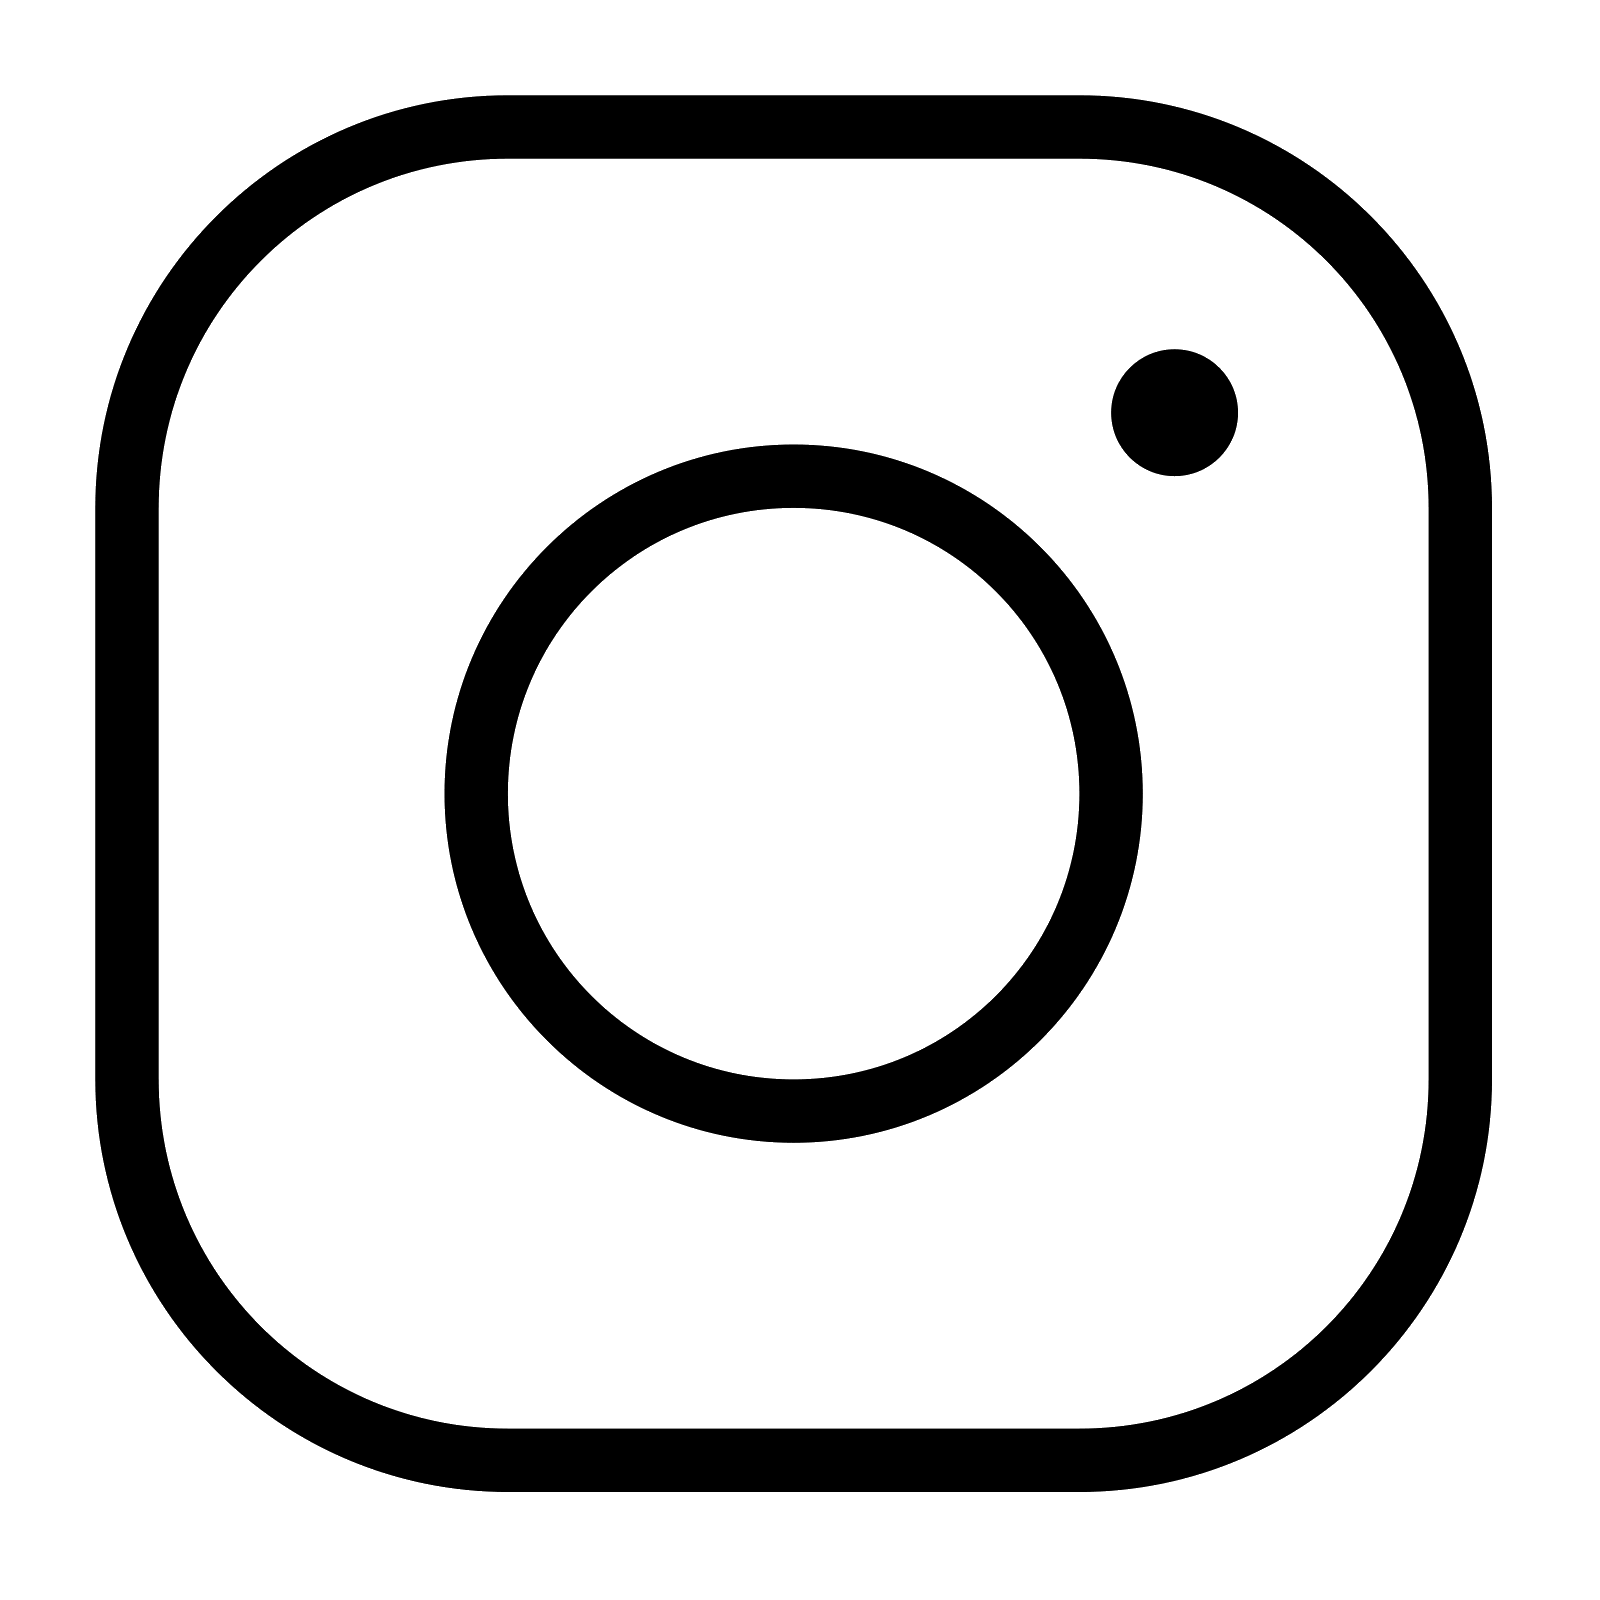 Instagtram Logo - Free Instagram Icon Black And White Png 88035. Download Instagram